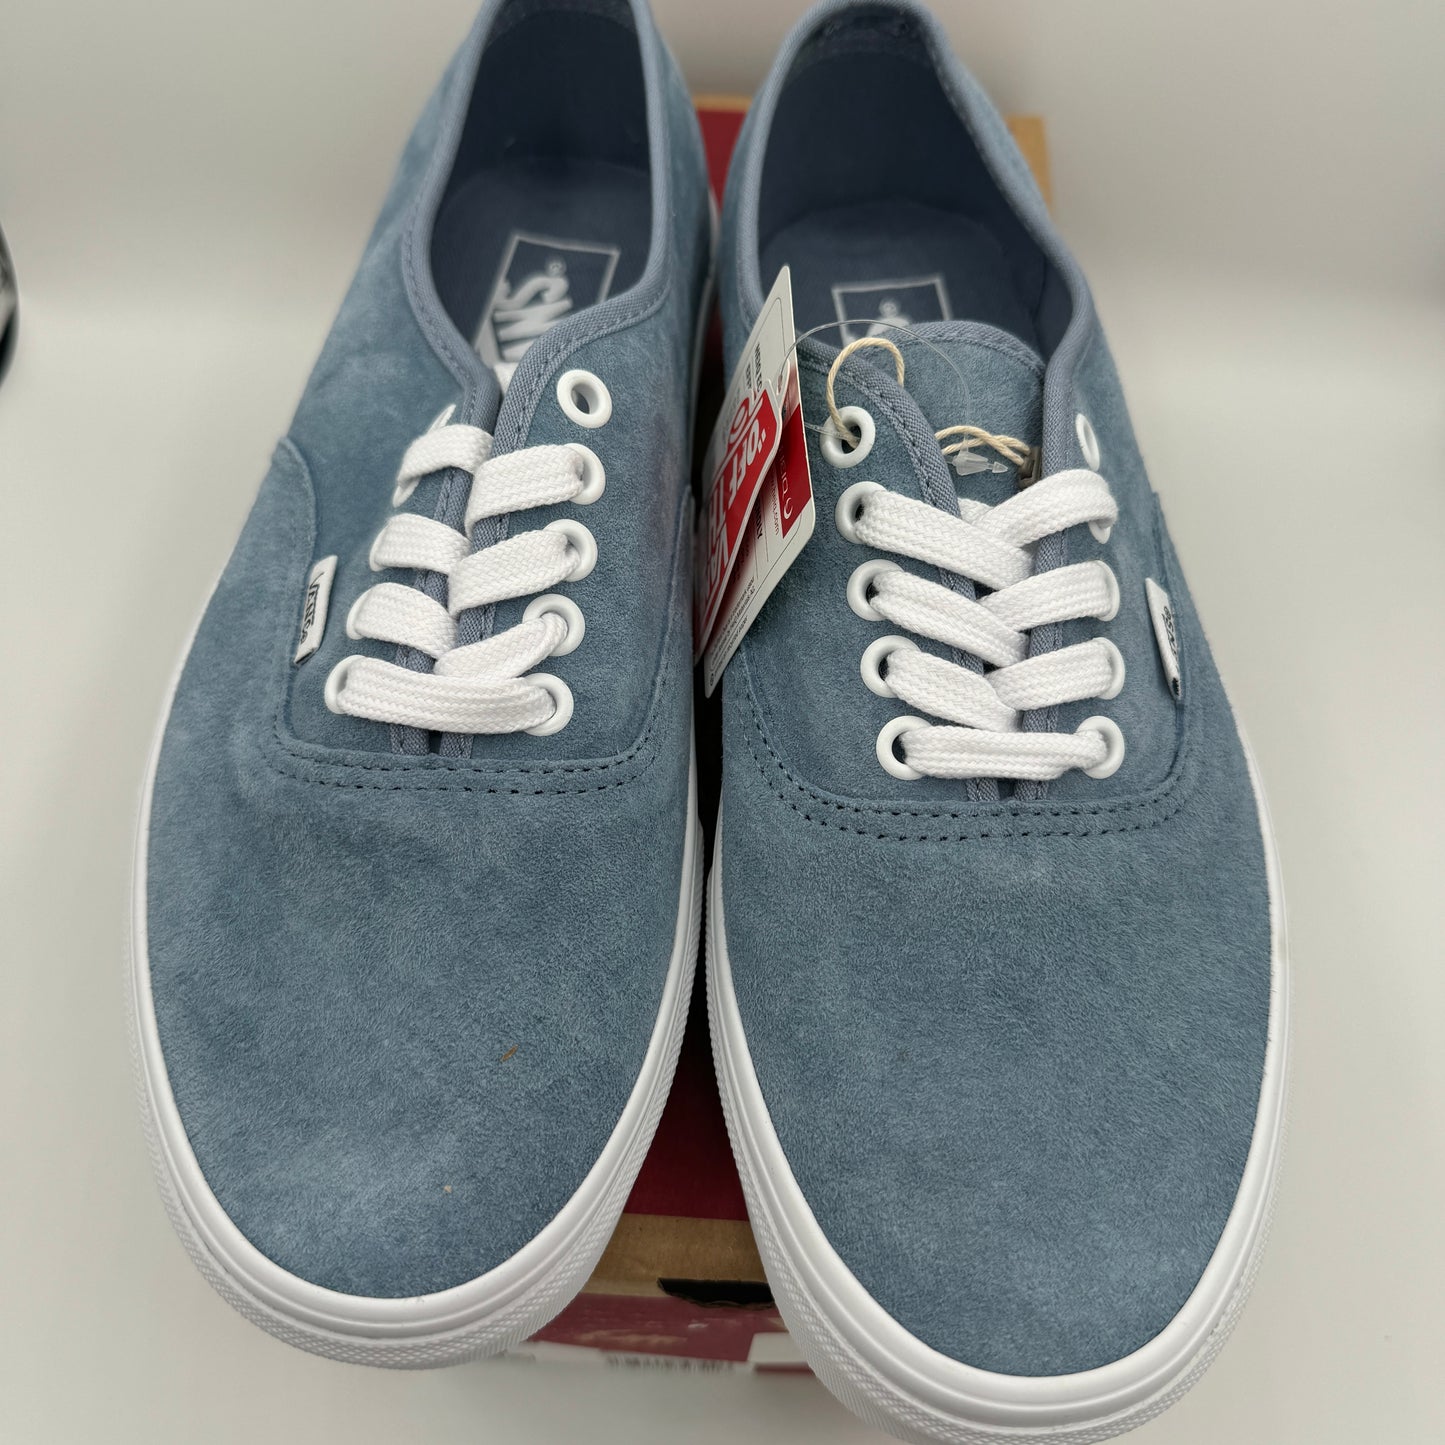 Vans Authentic Low Top Sneakers in Blue Ashley Pig Suede Leather